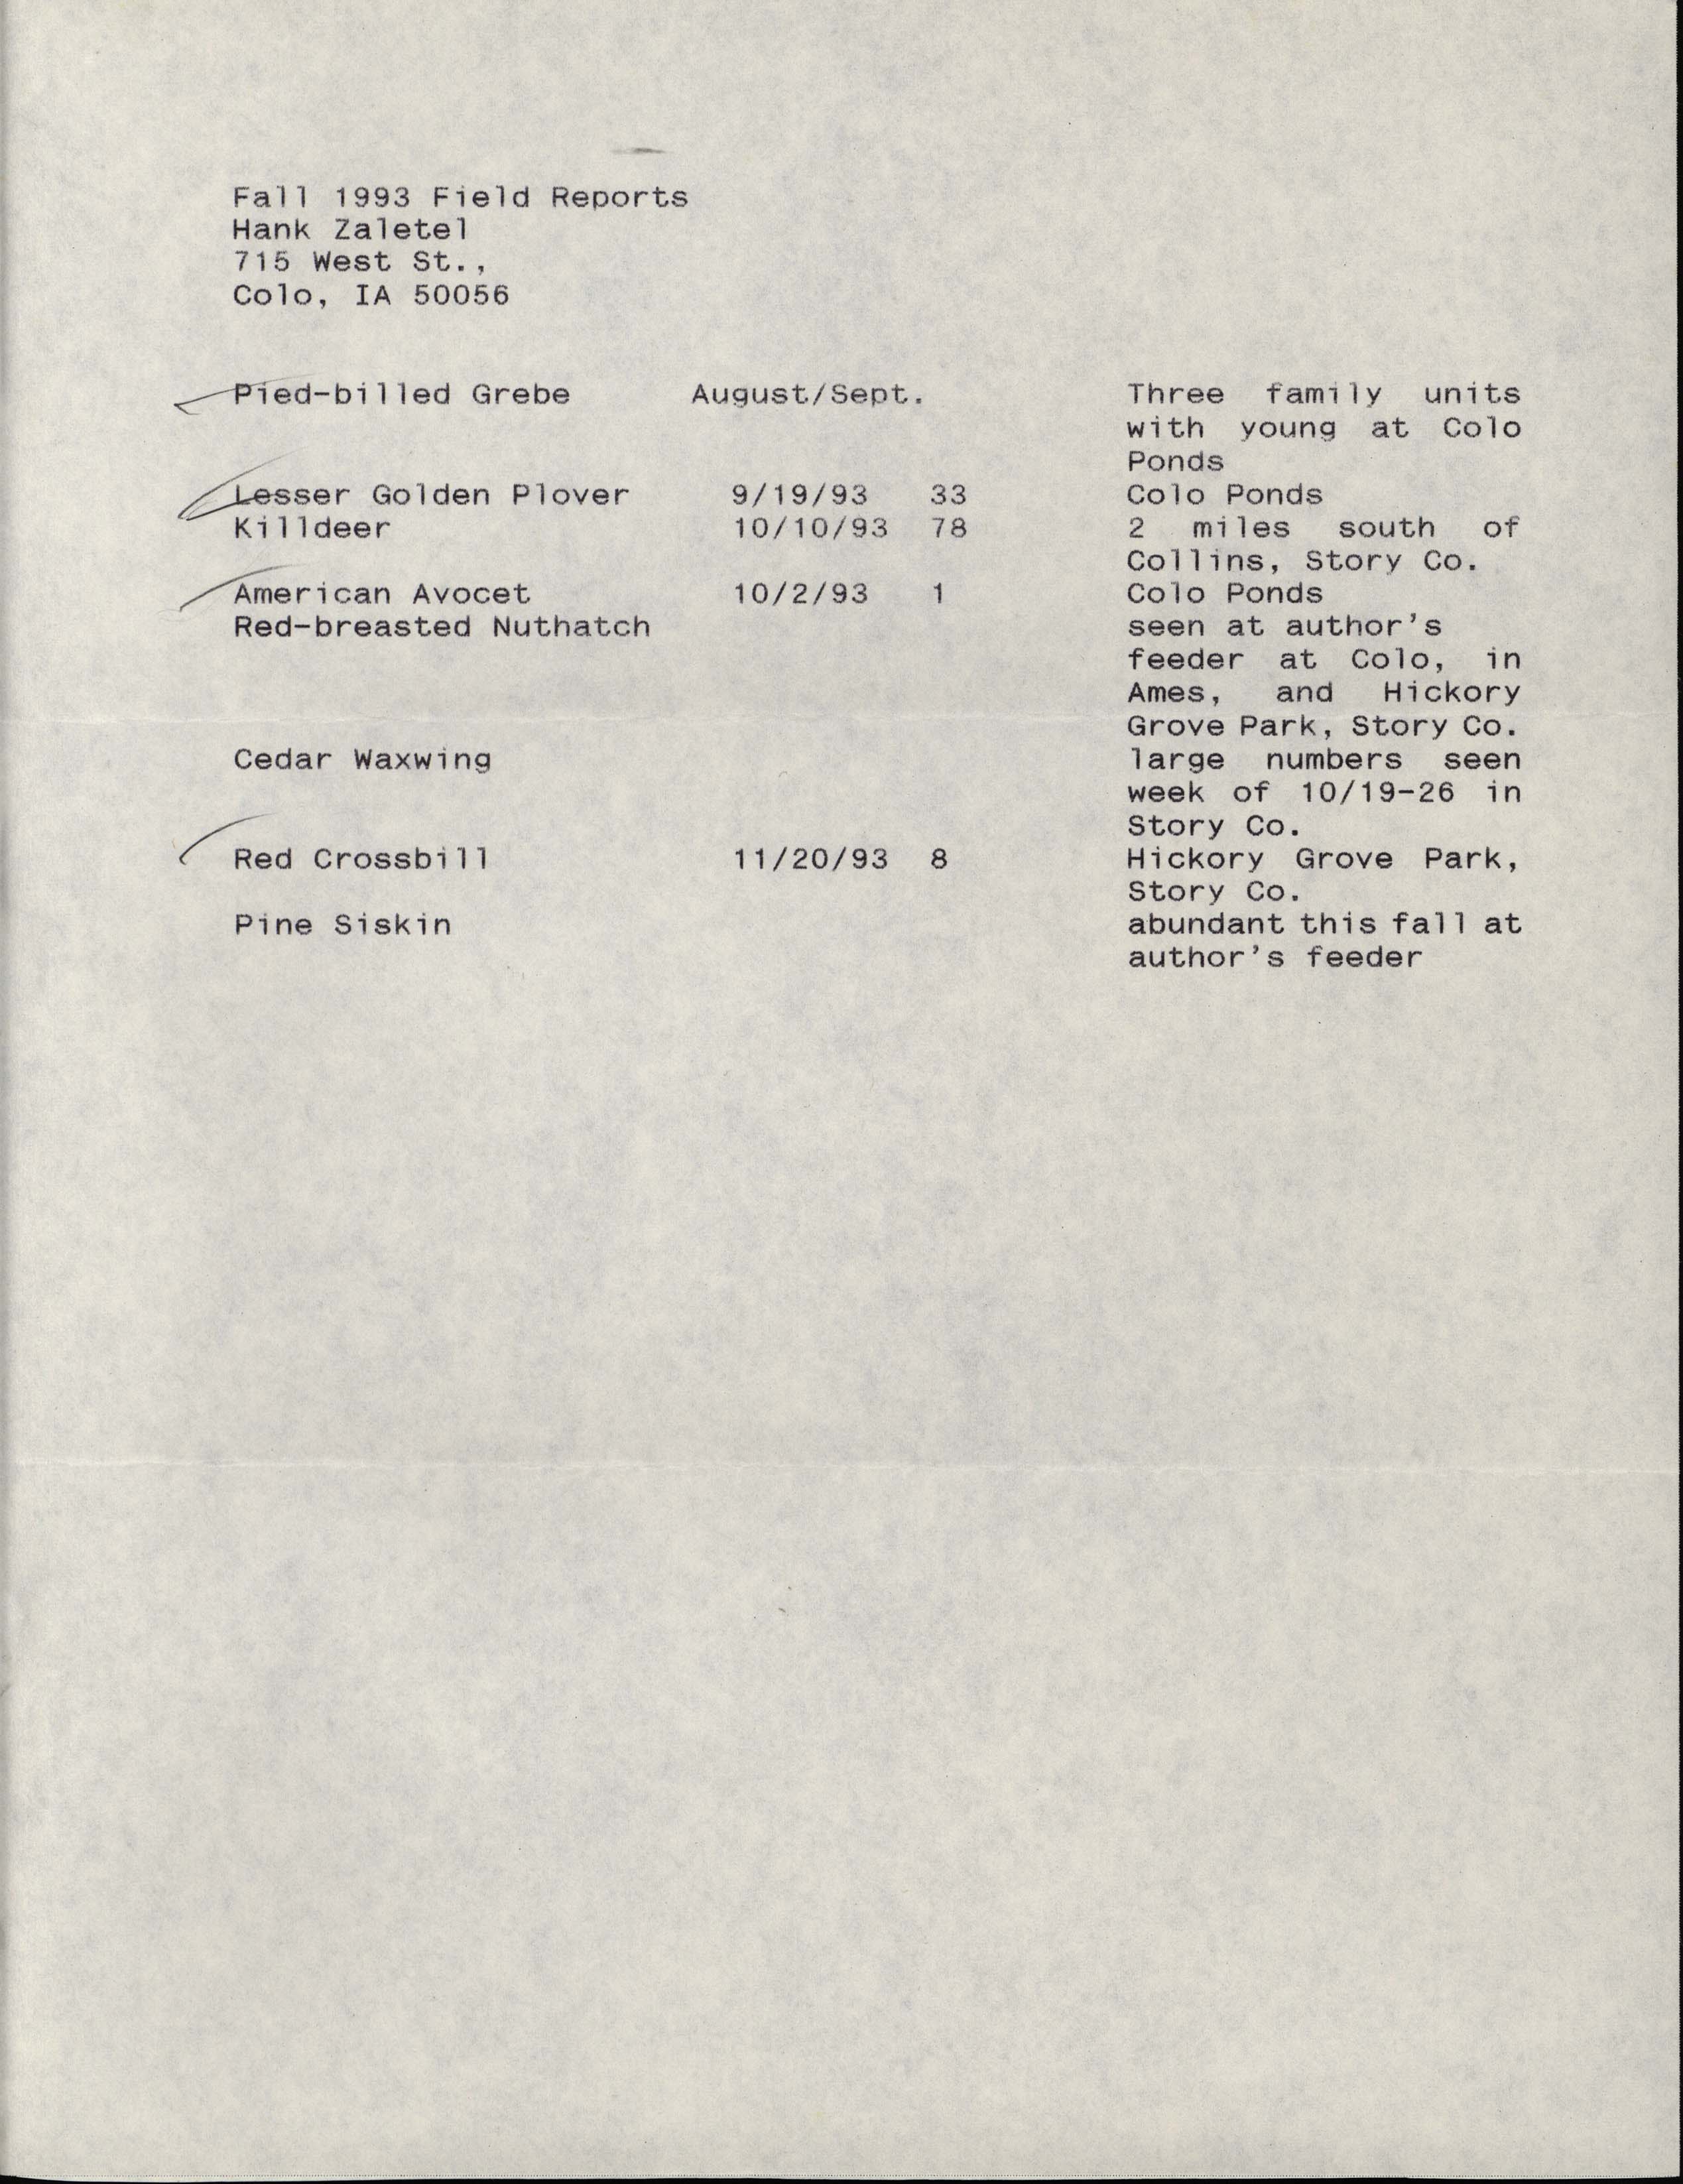 Field notes contributed by Hank Zaletel, fall 1993